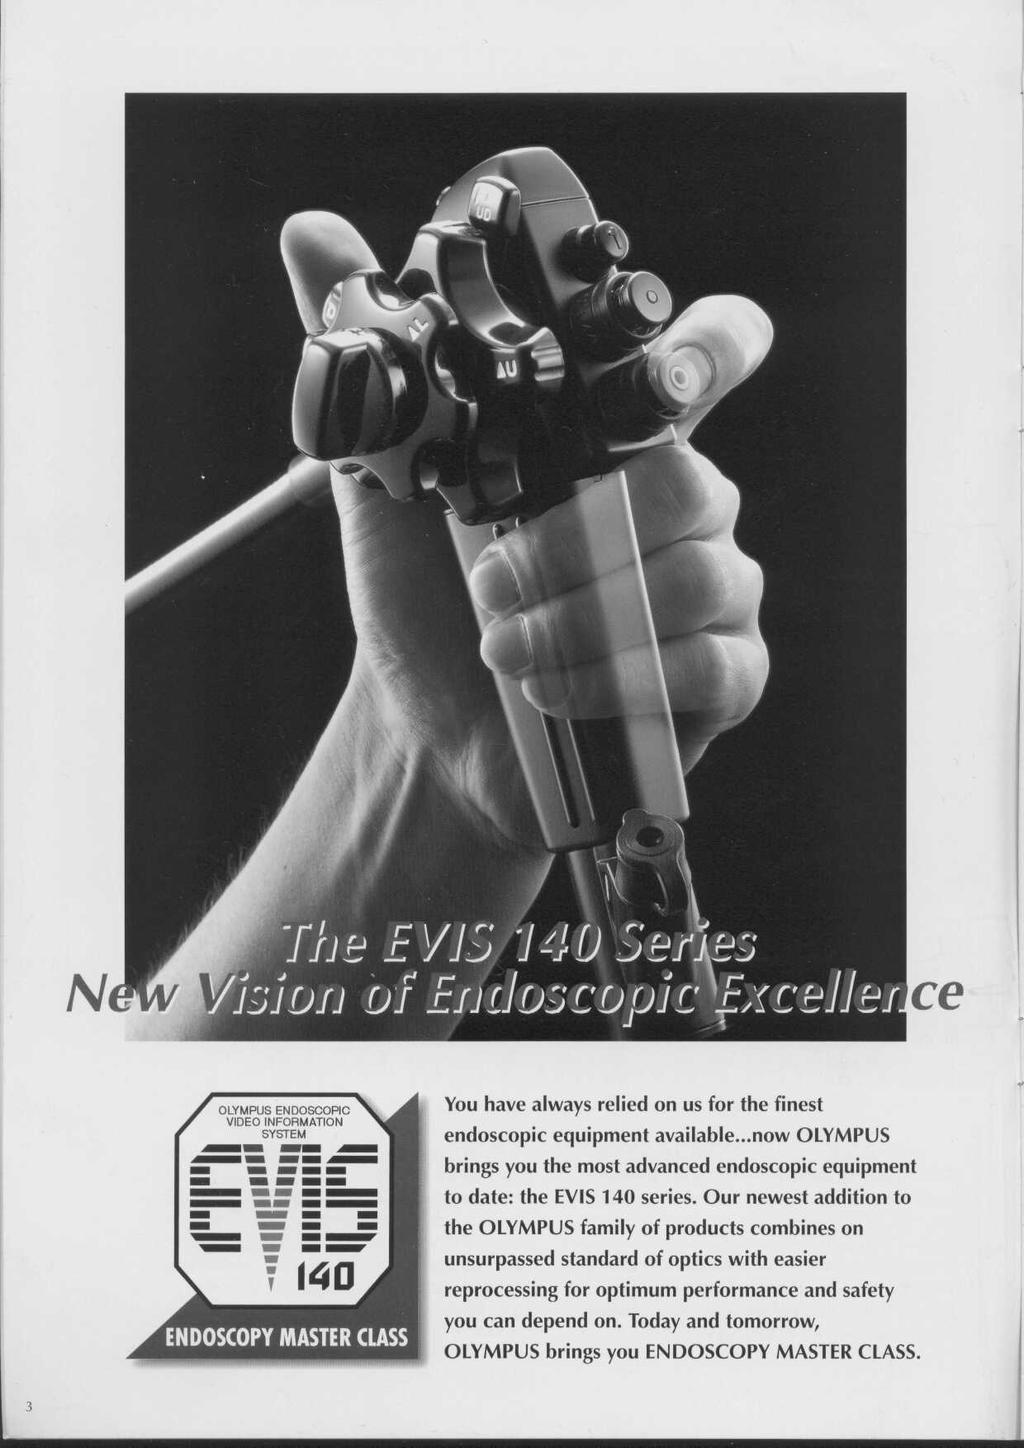 OLYMPUS ENDOSCOPIC VIDEO INFORMATION SYSTEM You have always relied on us for the finest endoscopic equipment available.